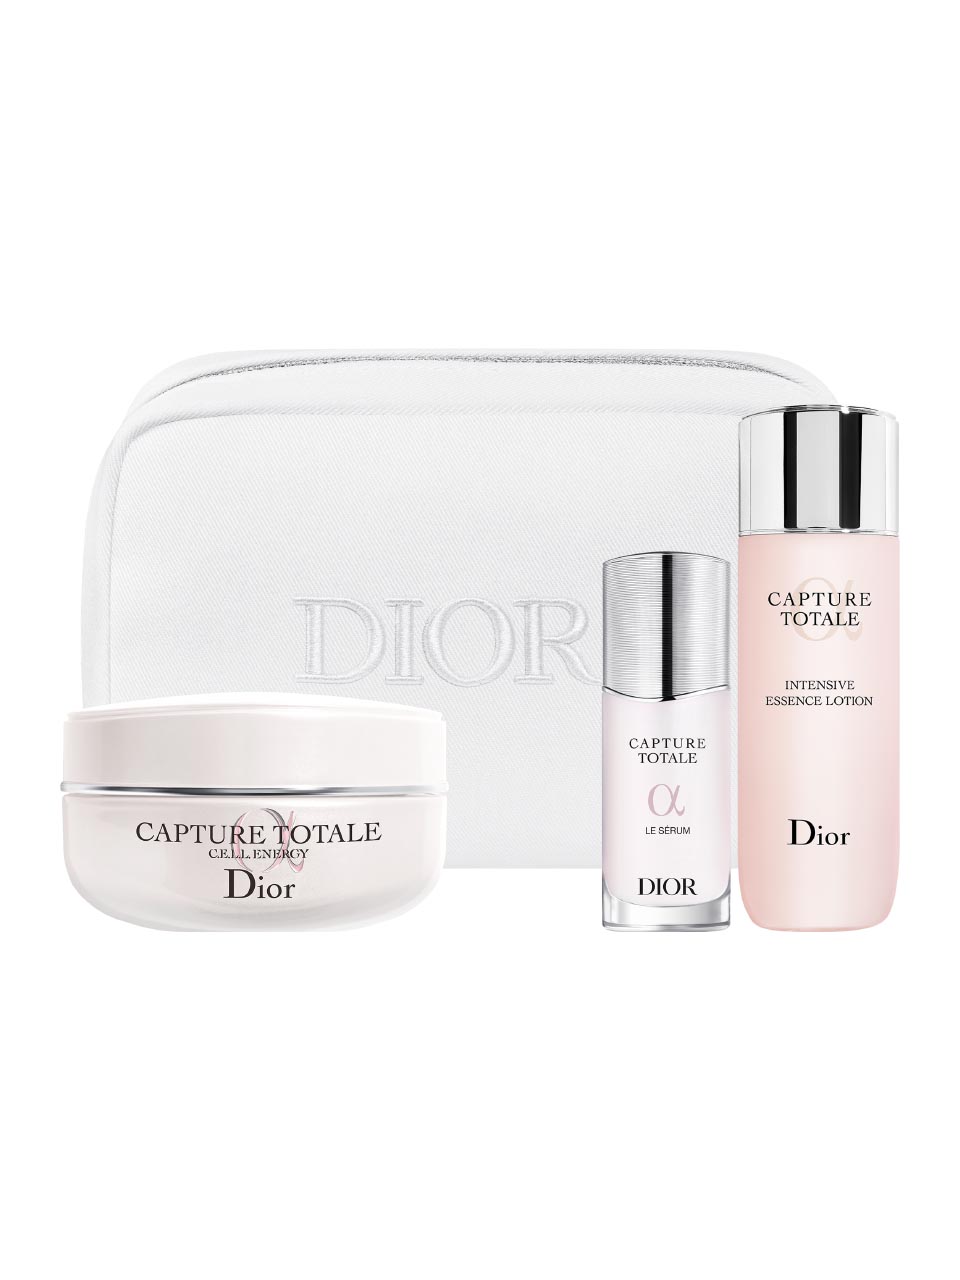 Dior Capture Totale Facial Care Set/Day Cream, Serum + Ess lotion null - onesize - 1